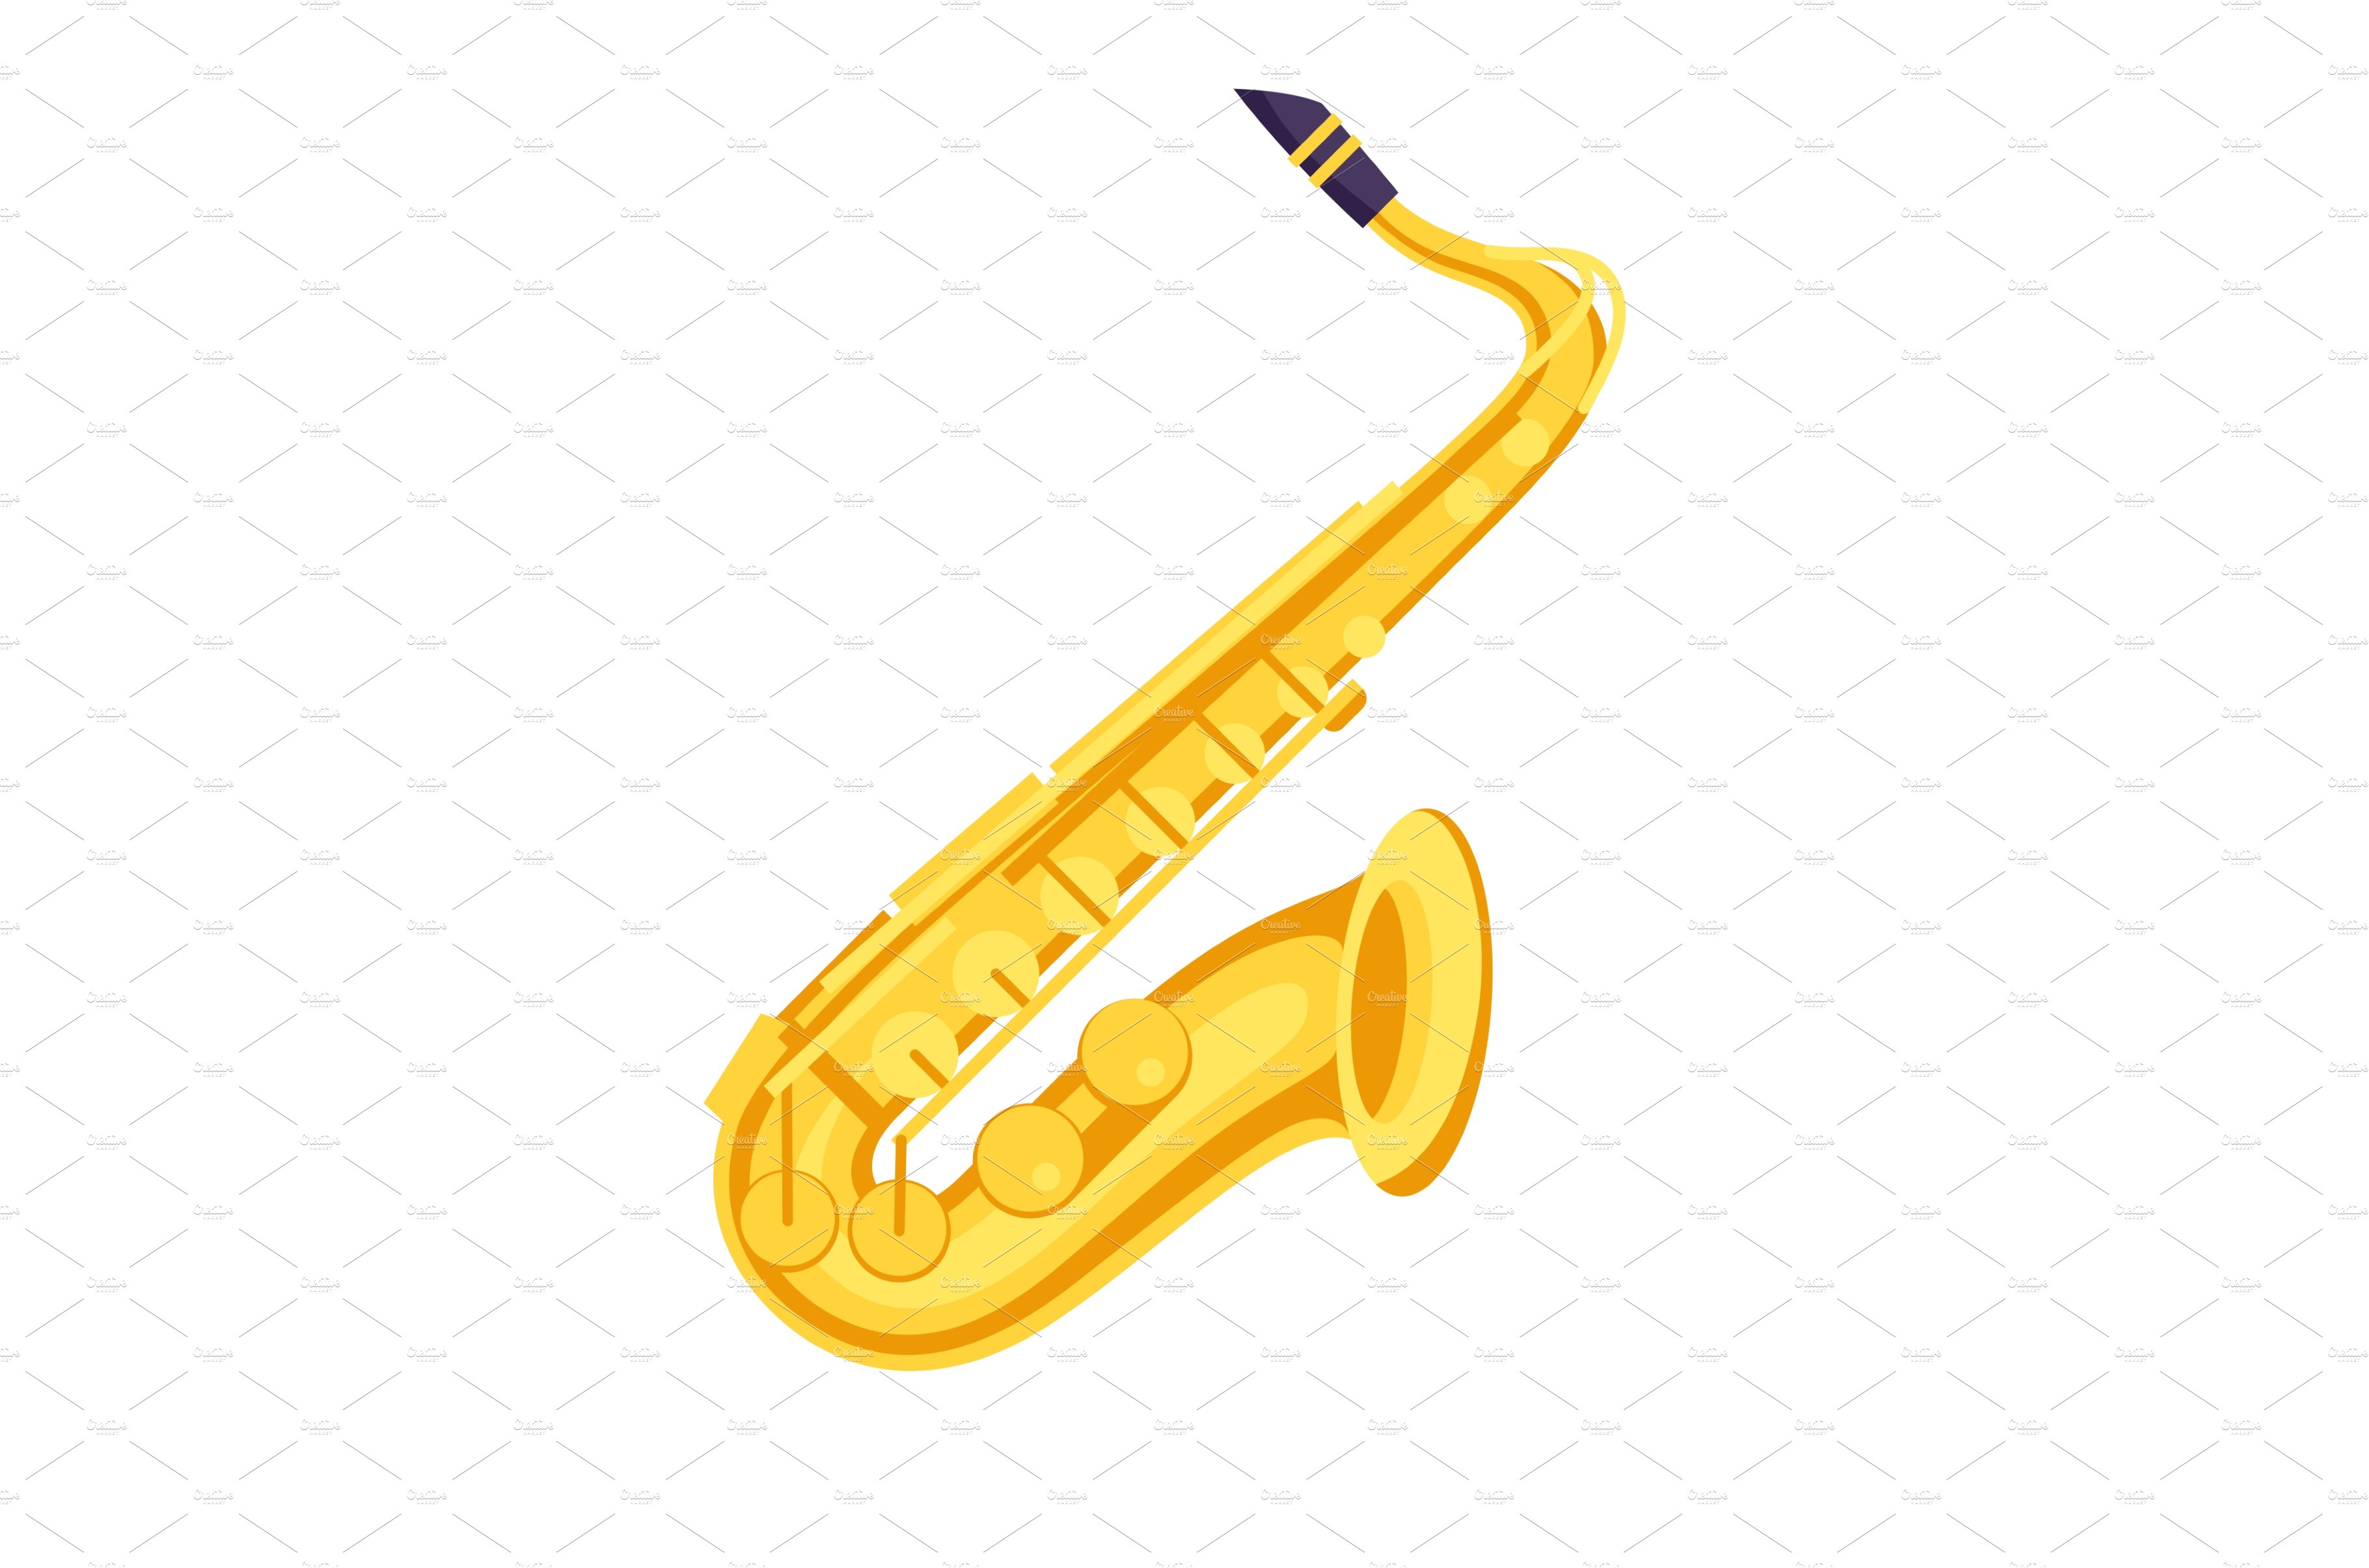 Illustration of saxophone. Musical cover image.